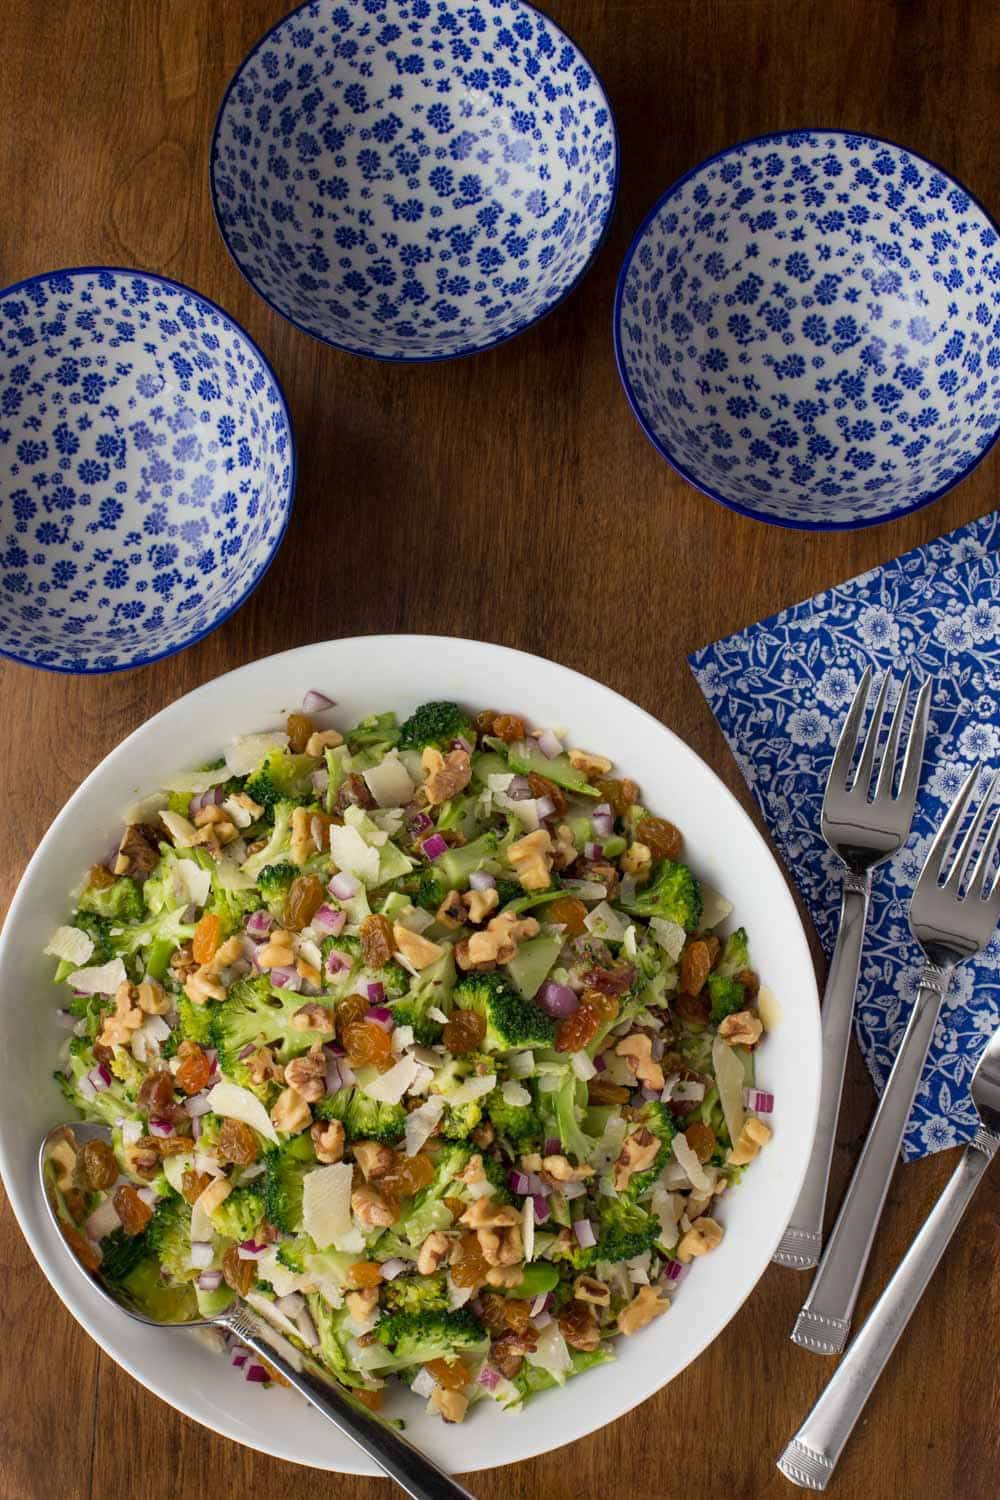 Shaved Broccoli Parmesan Salad with Lemon Mustard Dressing - healthy, unique and season-less, this delicious salad pairs perfectly with sandwiches, wraps and soups. It's also wonderful for parties and potlucks!